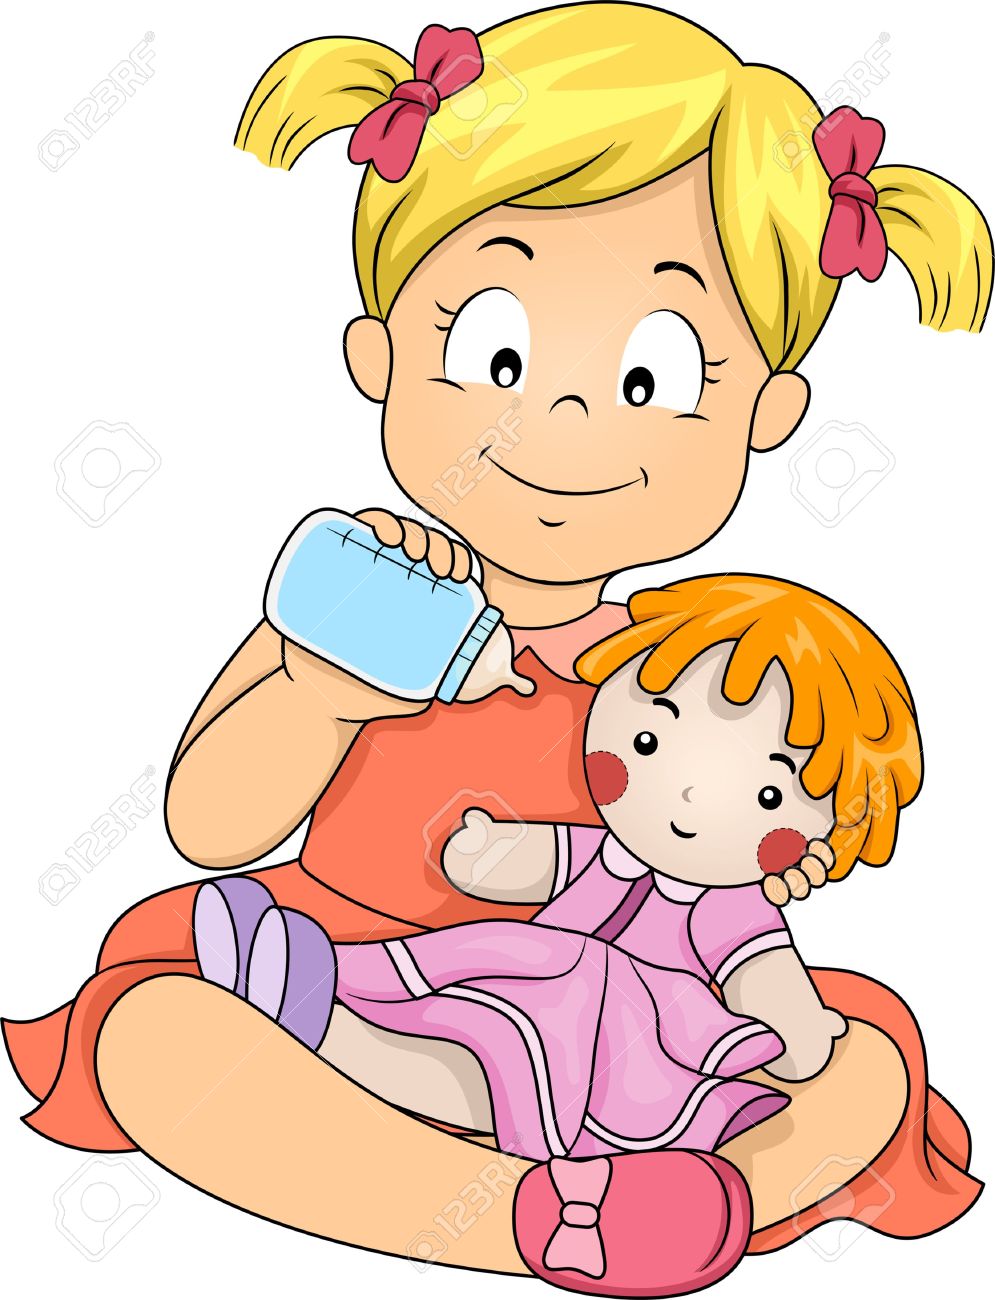 clipart of baby dolls - photo #10